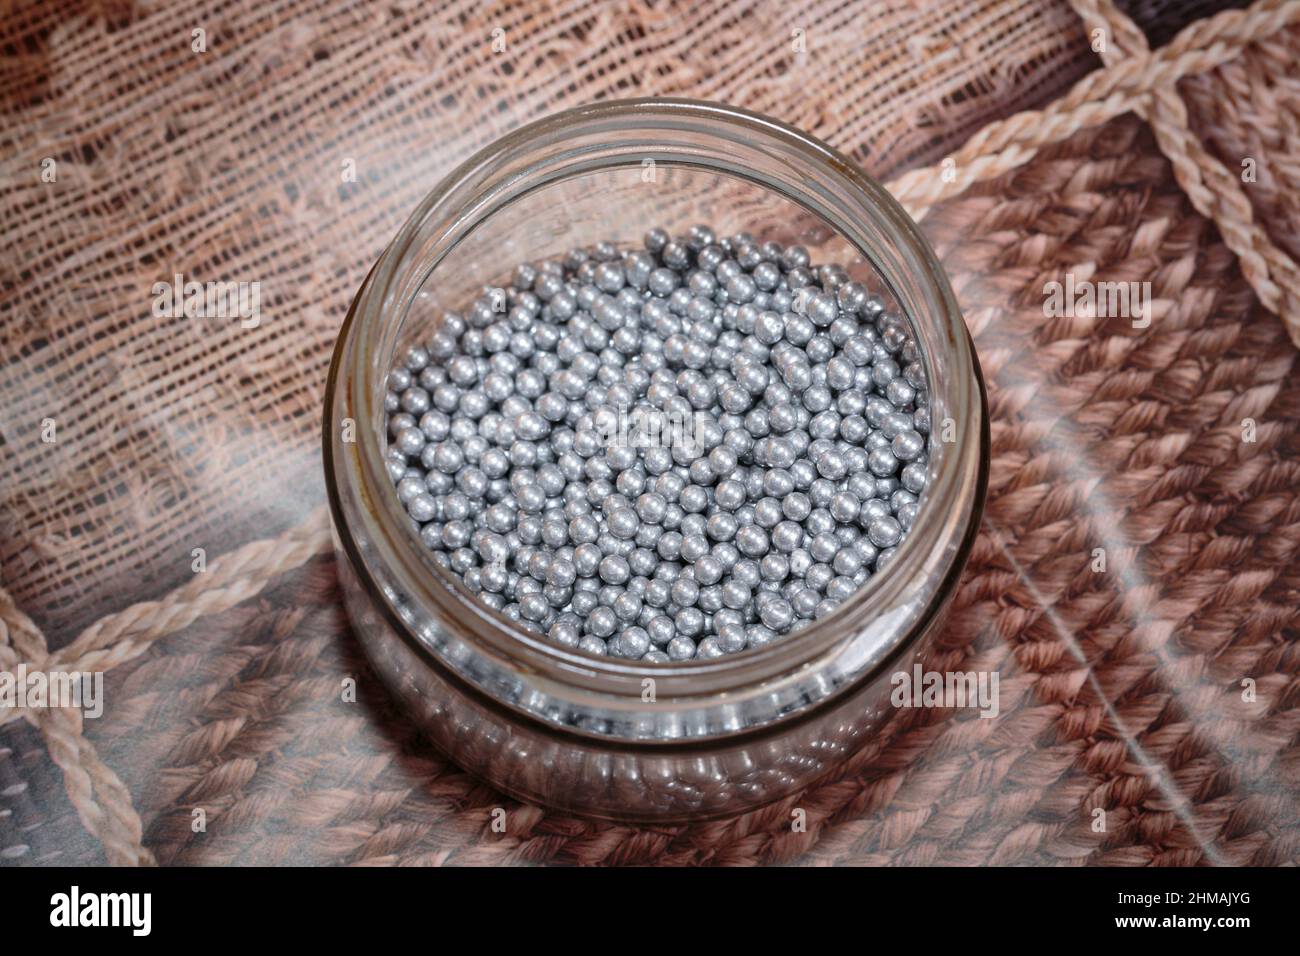 Silver sugar dragee in a plastic bowl. It is on a table covered with a patterned tablecloth. Close-up. Stock Photo